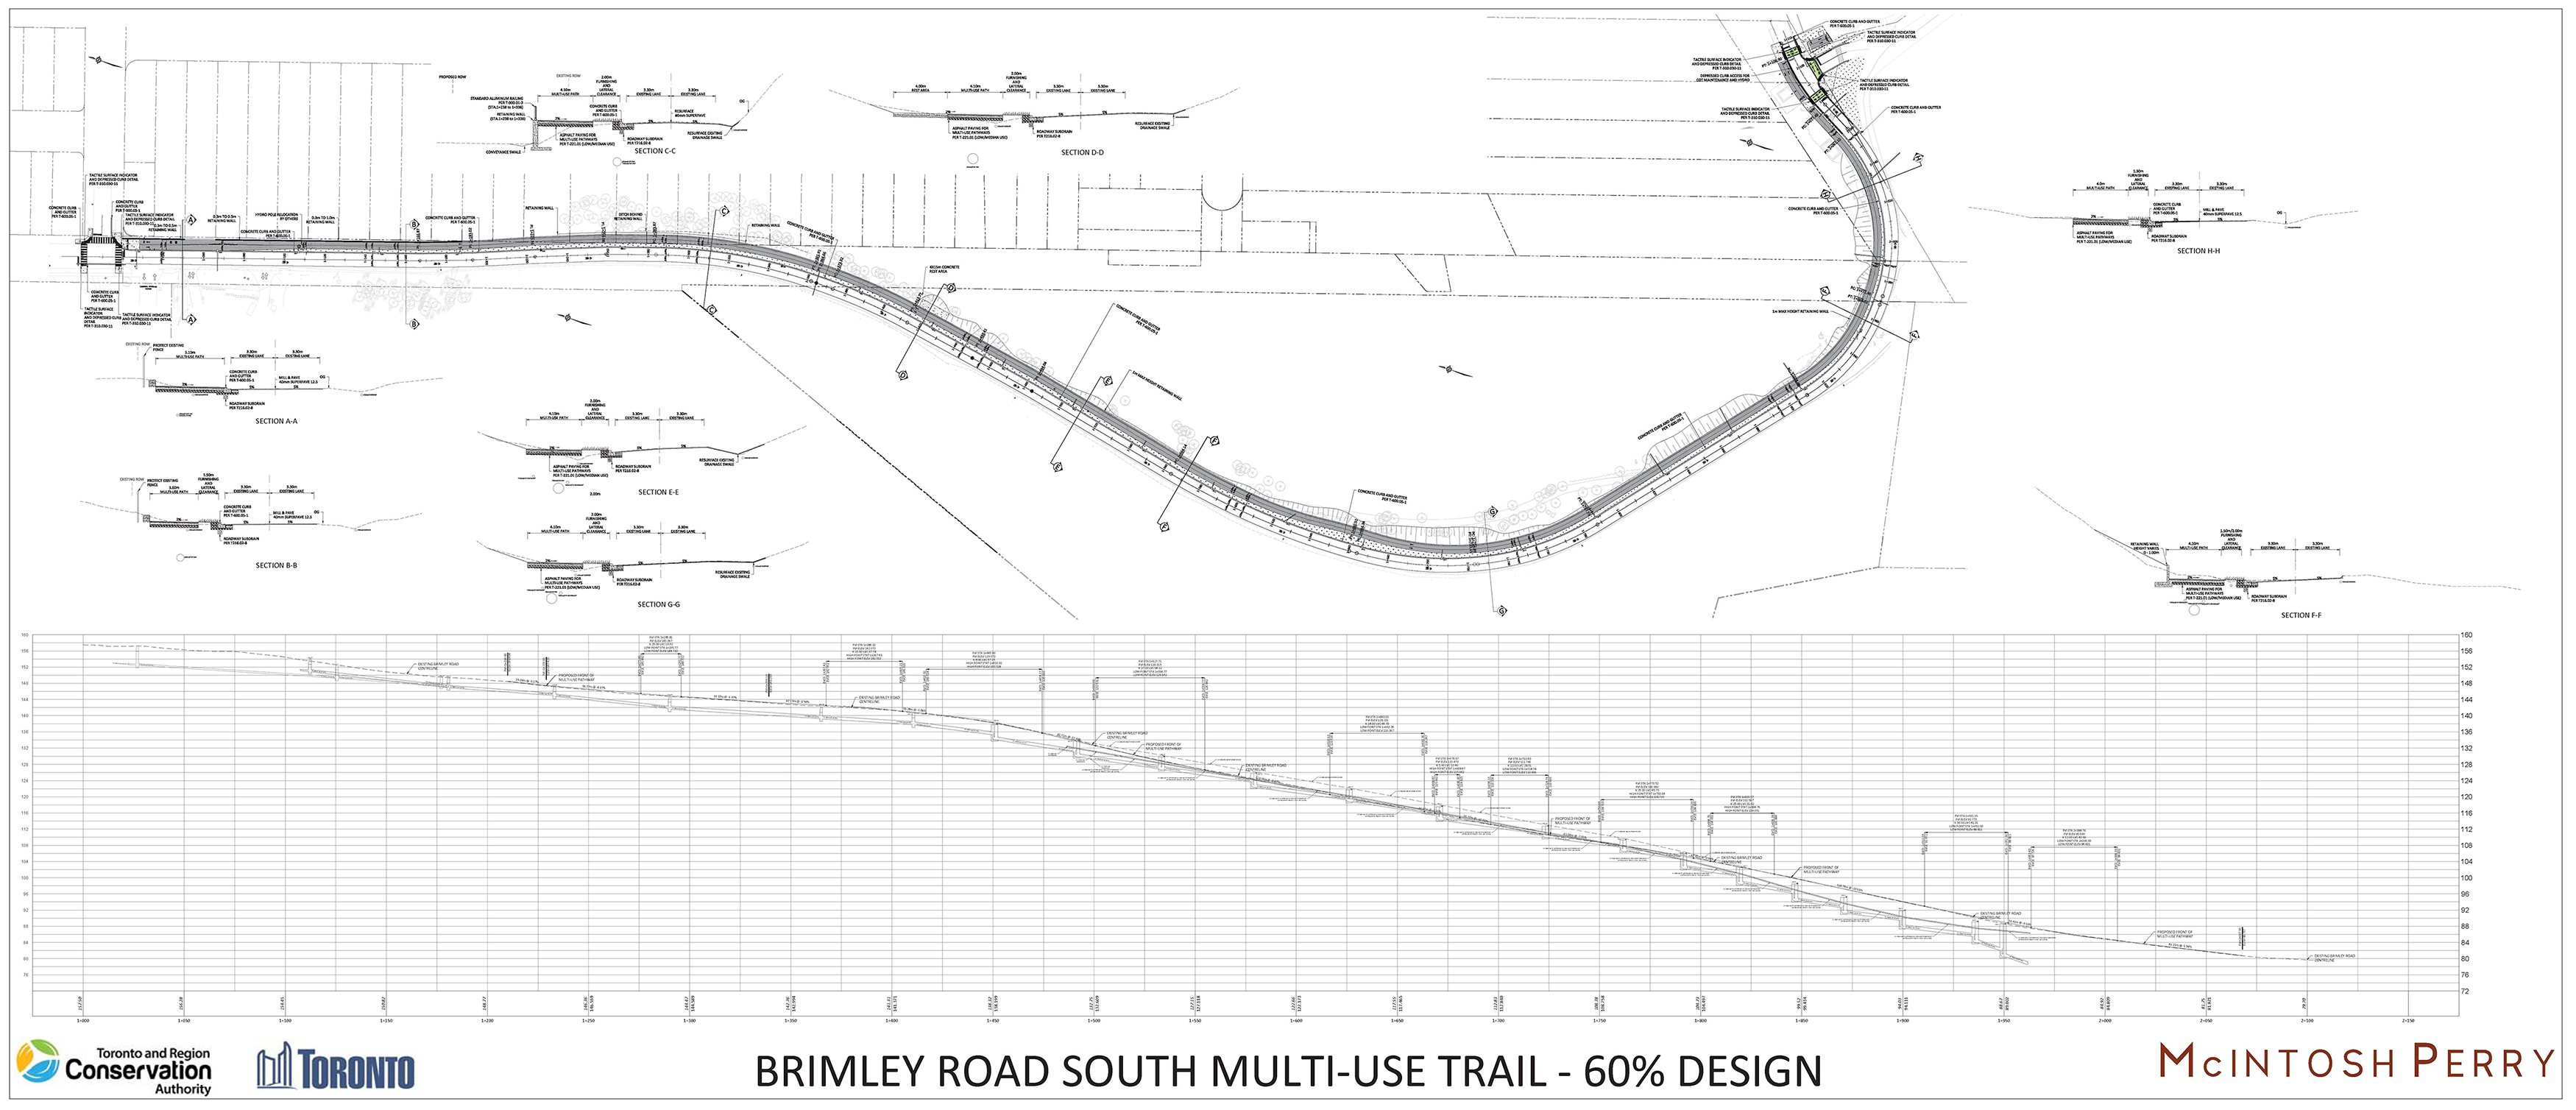 Planview drawing of the multi-use trail along the east side of Brimley Road South